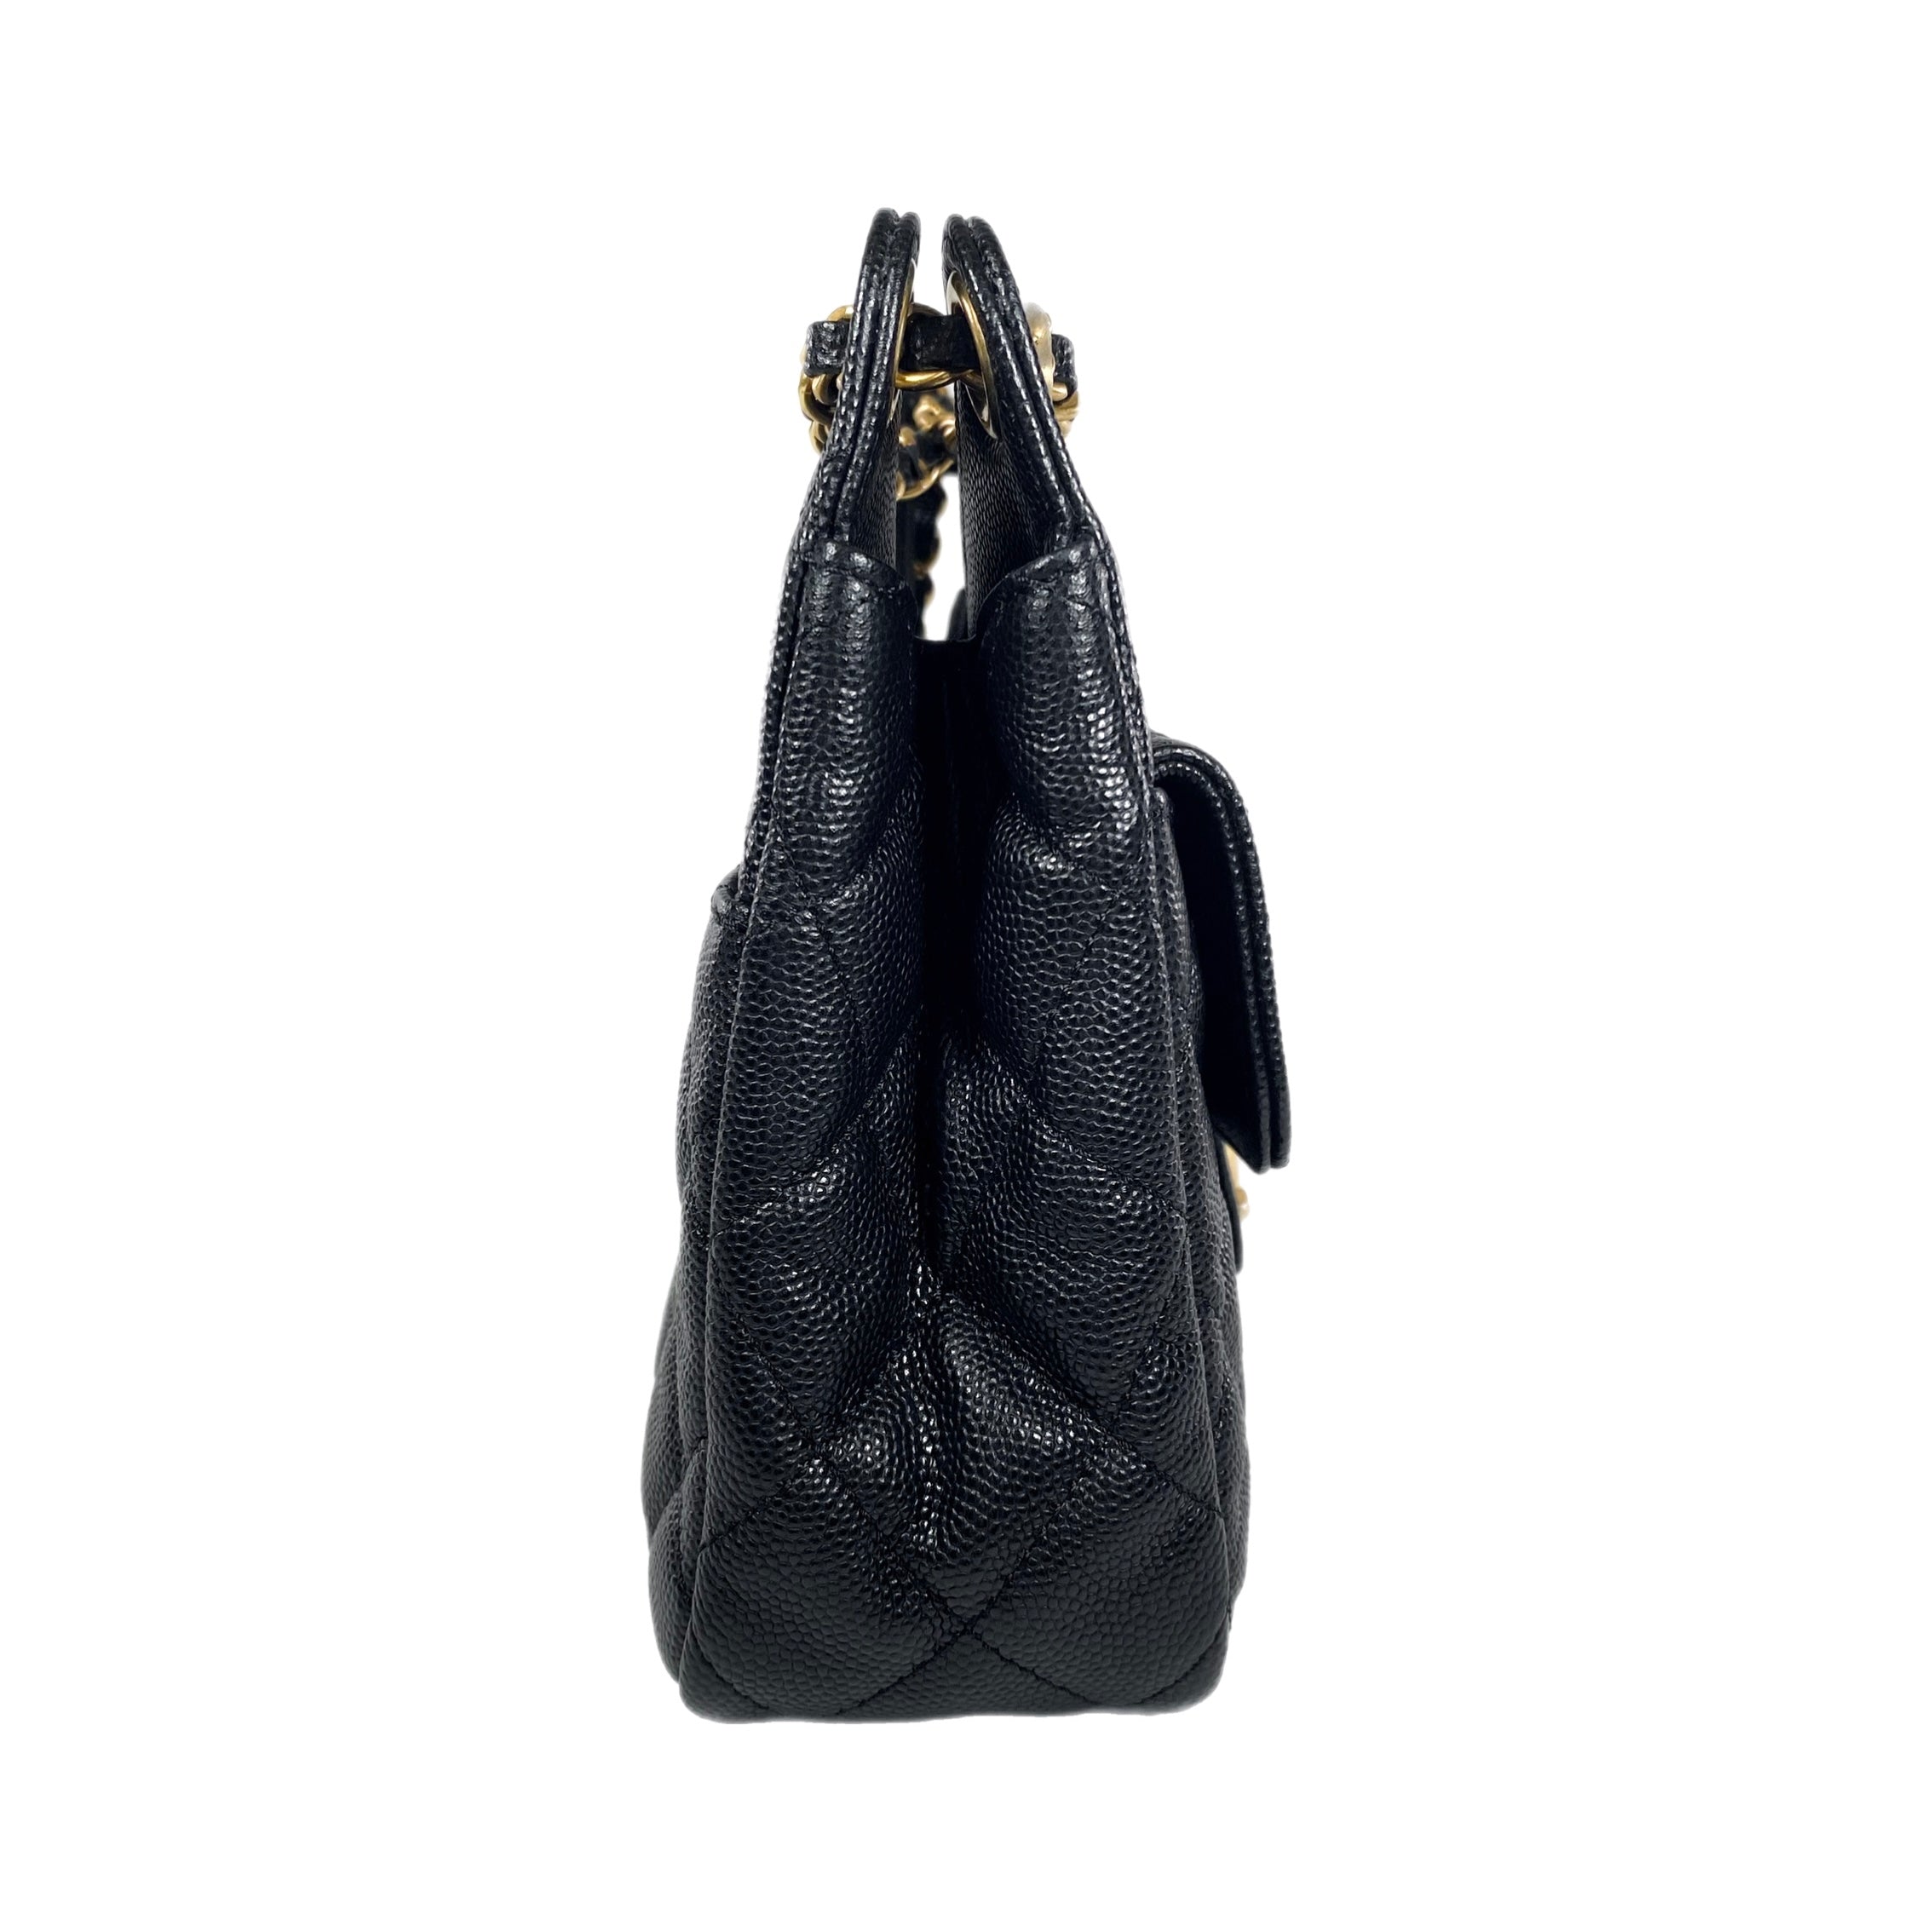 Chanel Small Black Quilted Caviar Wavy Hobo Bag